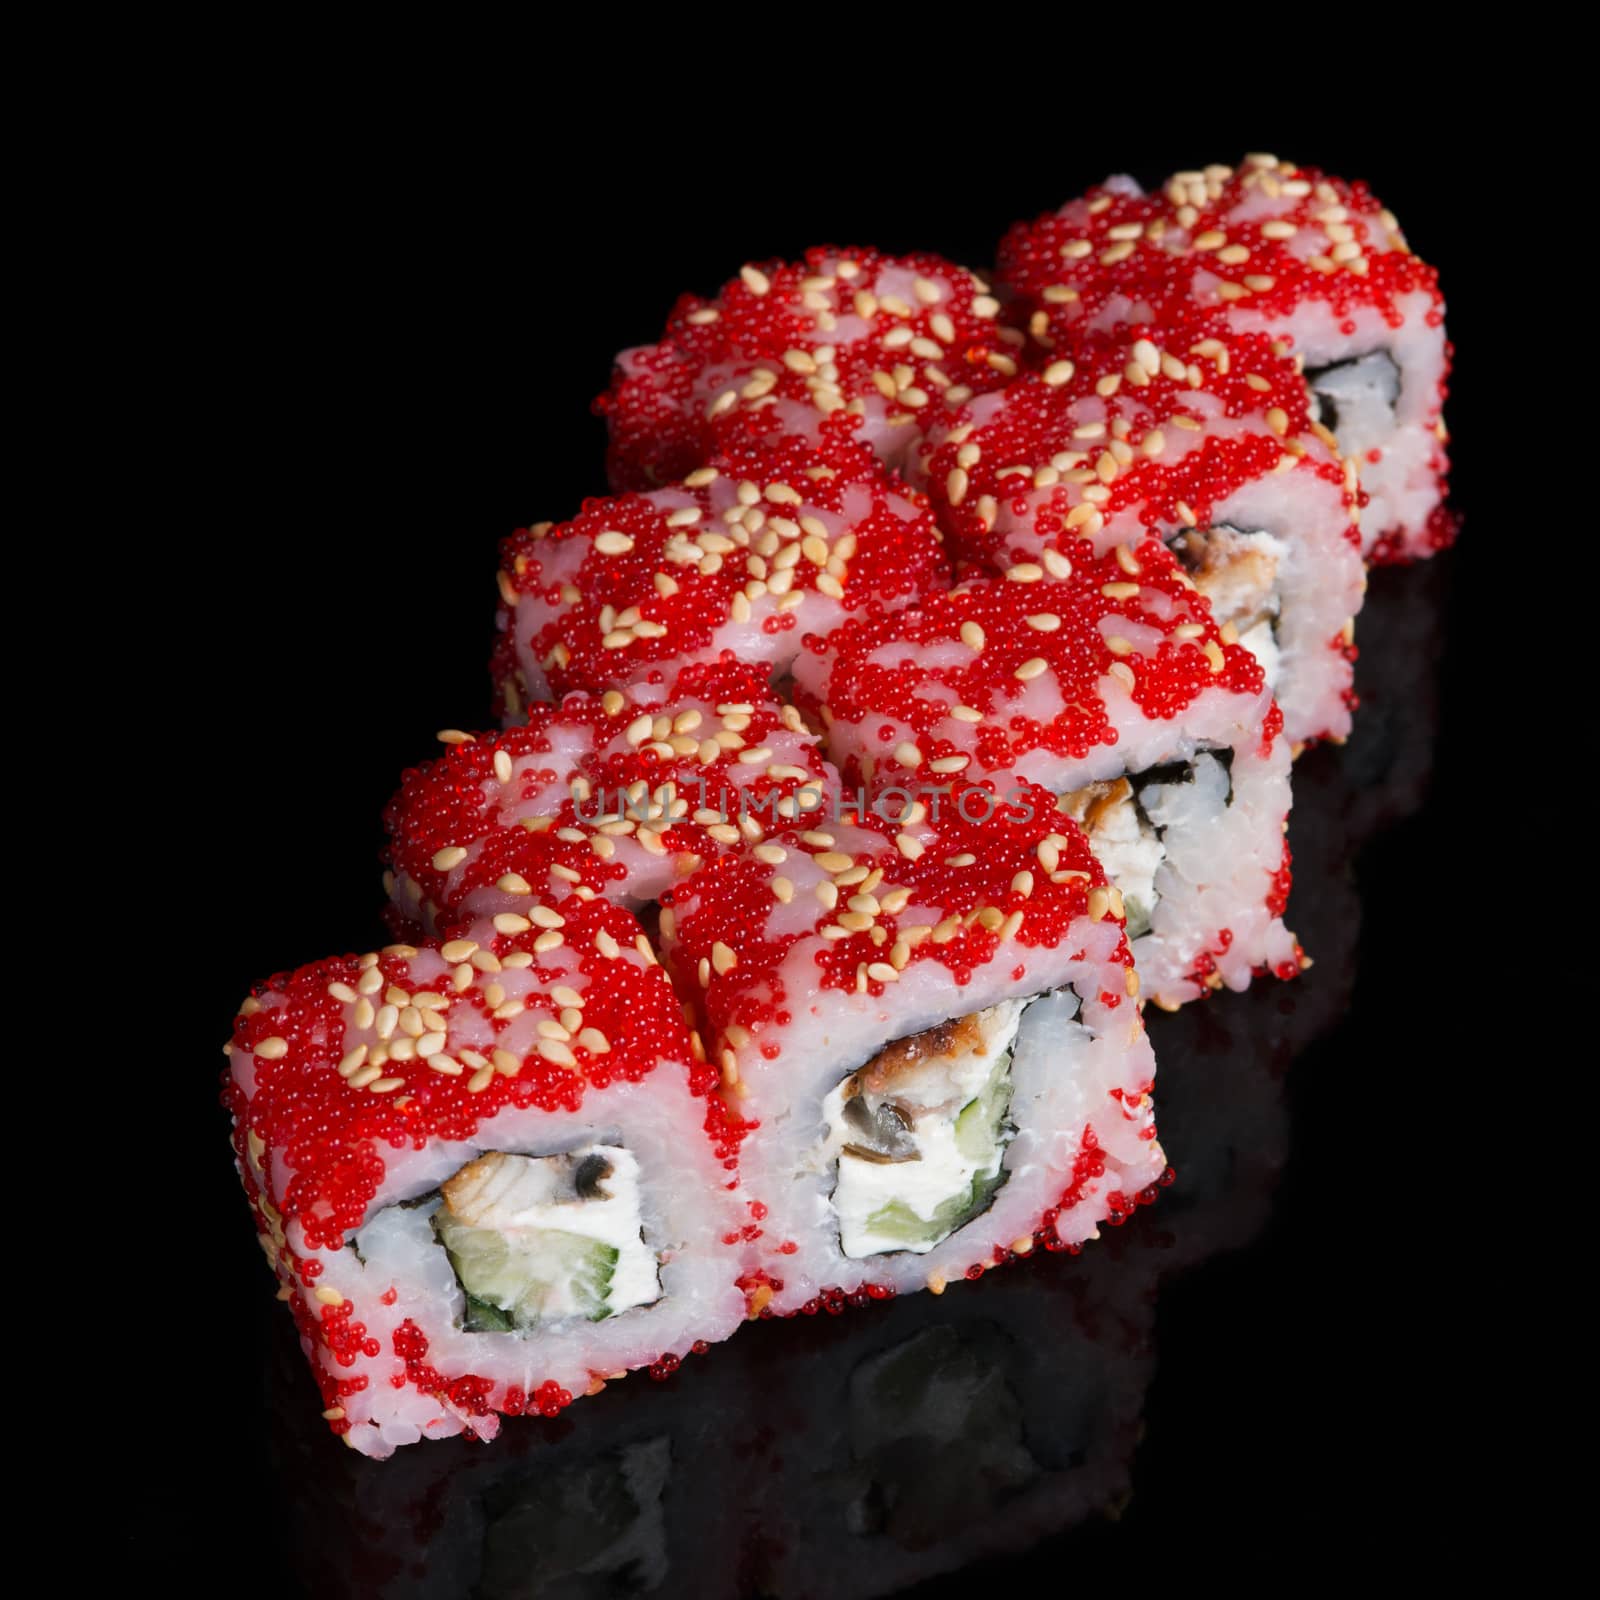 Sushi rolls with soft cheese, eel, cucumber and flying fish roe on black background